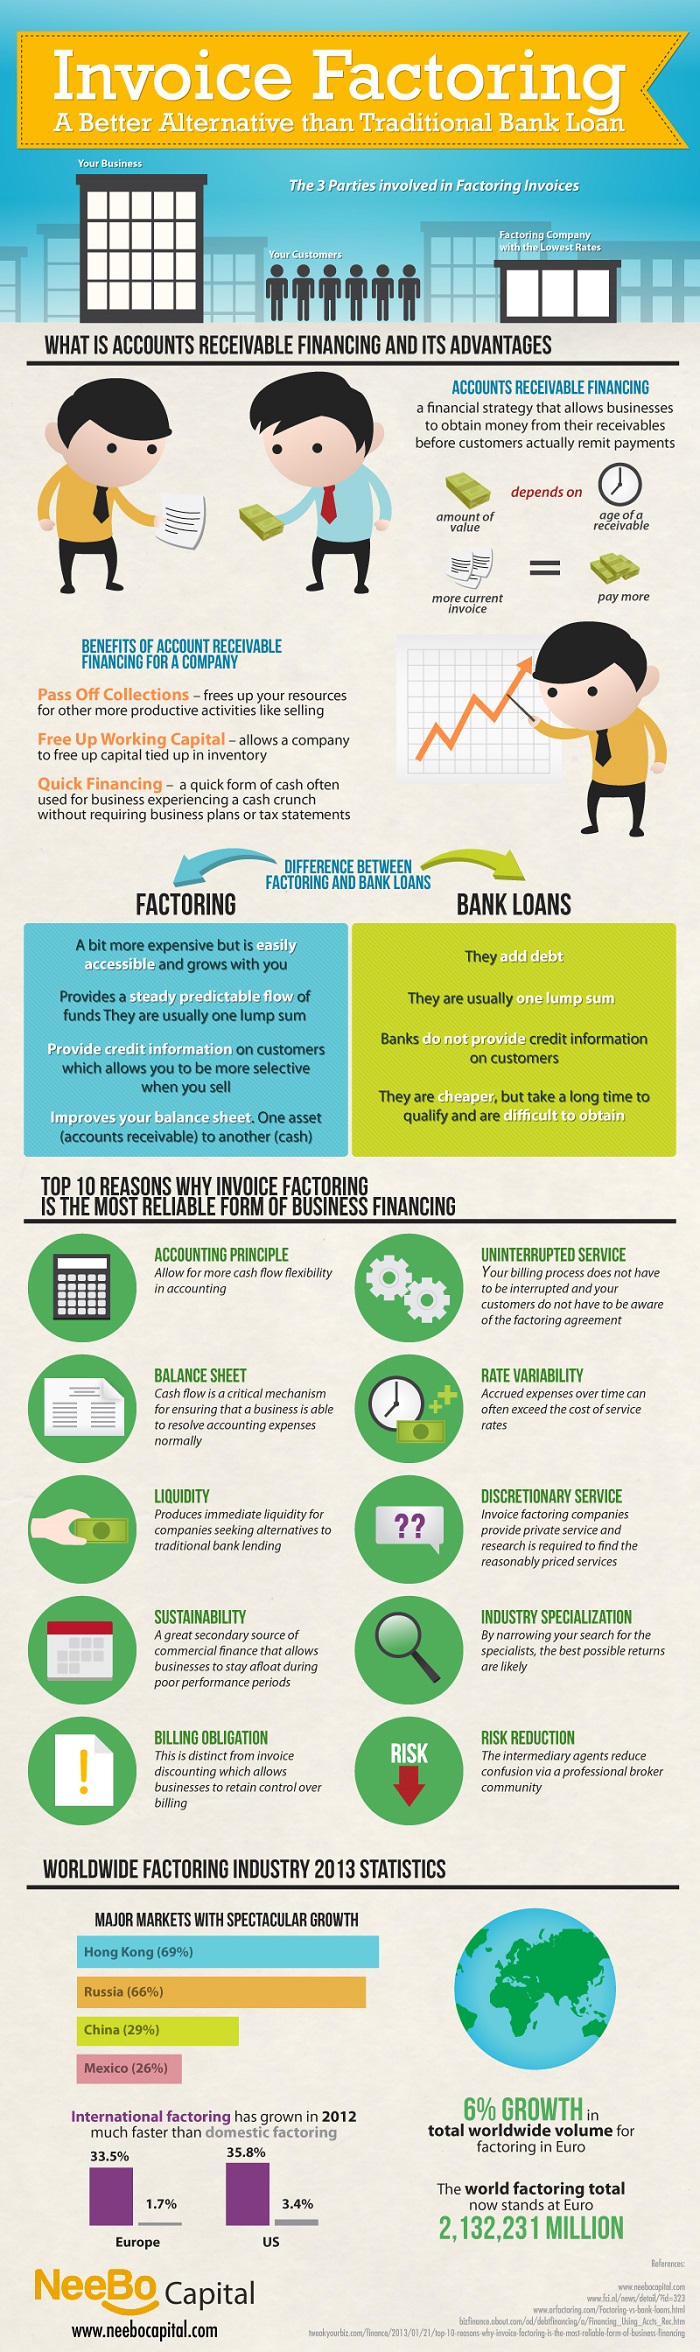 factoring infographic